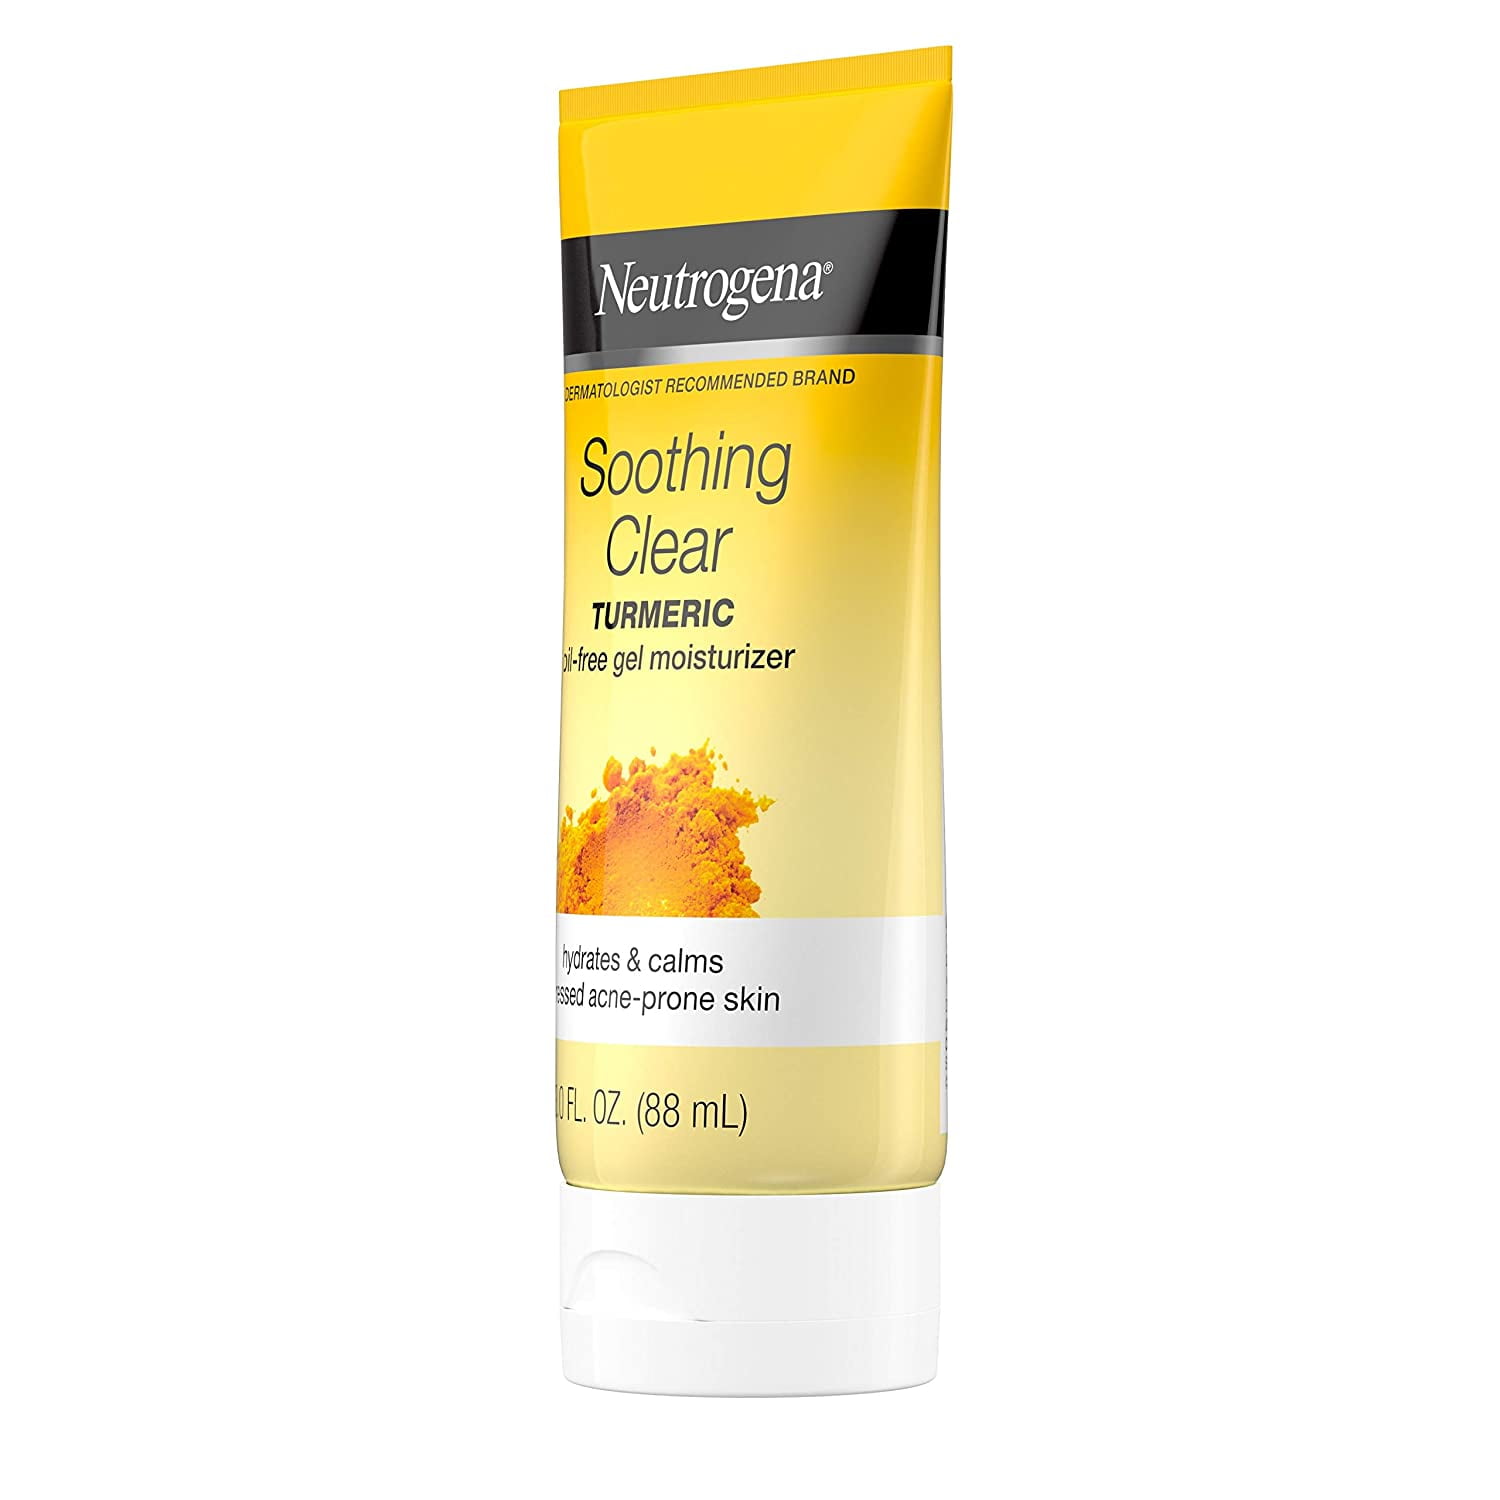 Neutrogena 3in1 Make-up Remover curcuma clear soothing oil-free for  blemished & sensitive skin, 200 mL